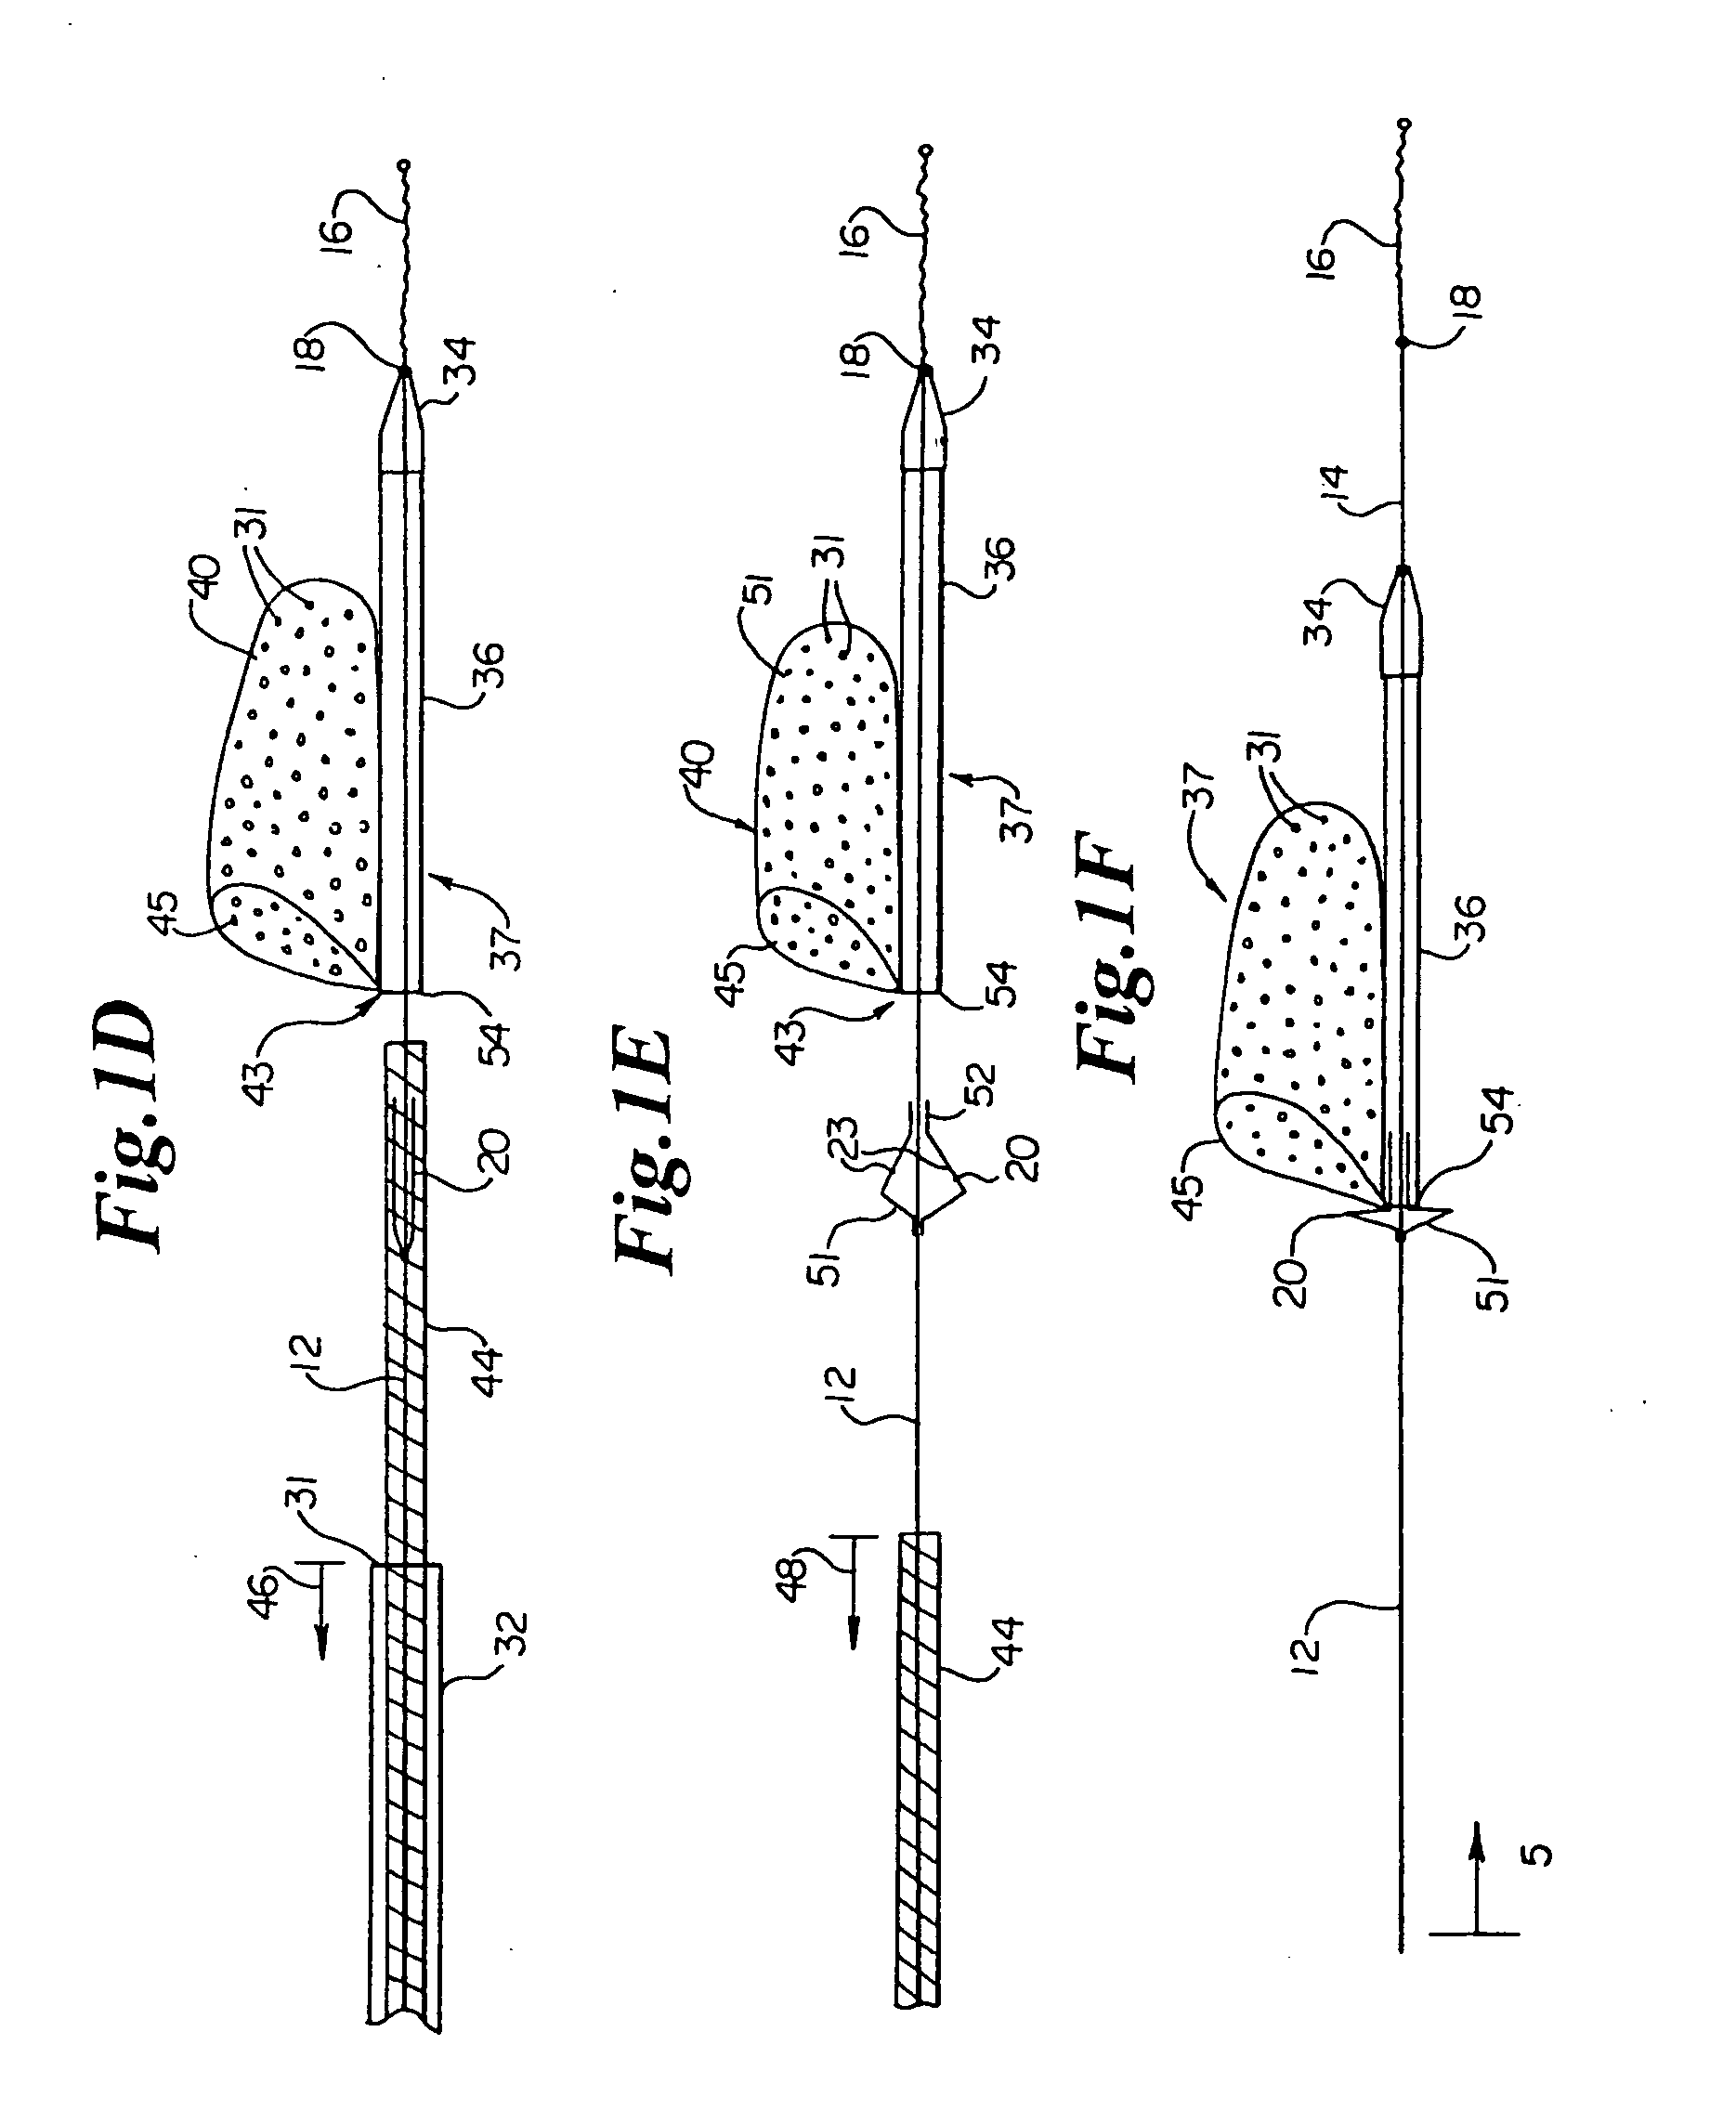 Vascular embolic filter devices and methods of use therefor